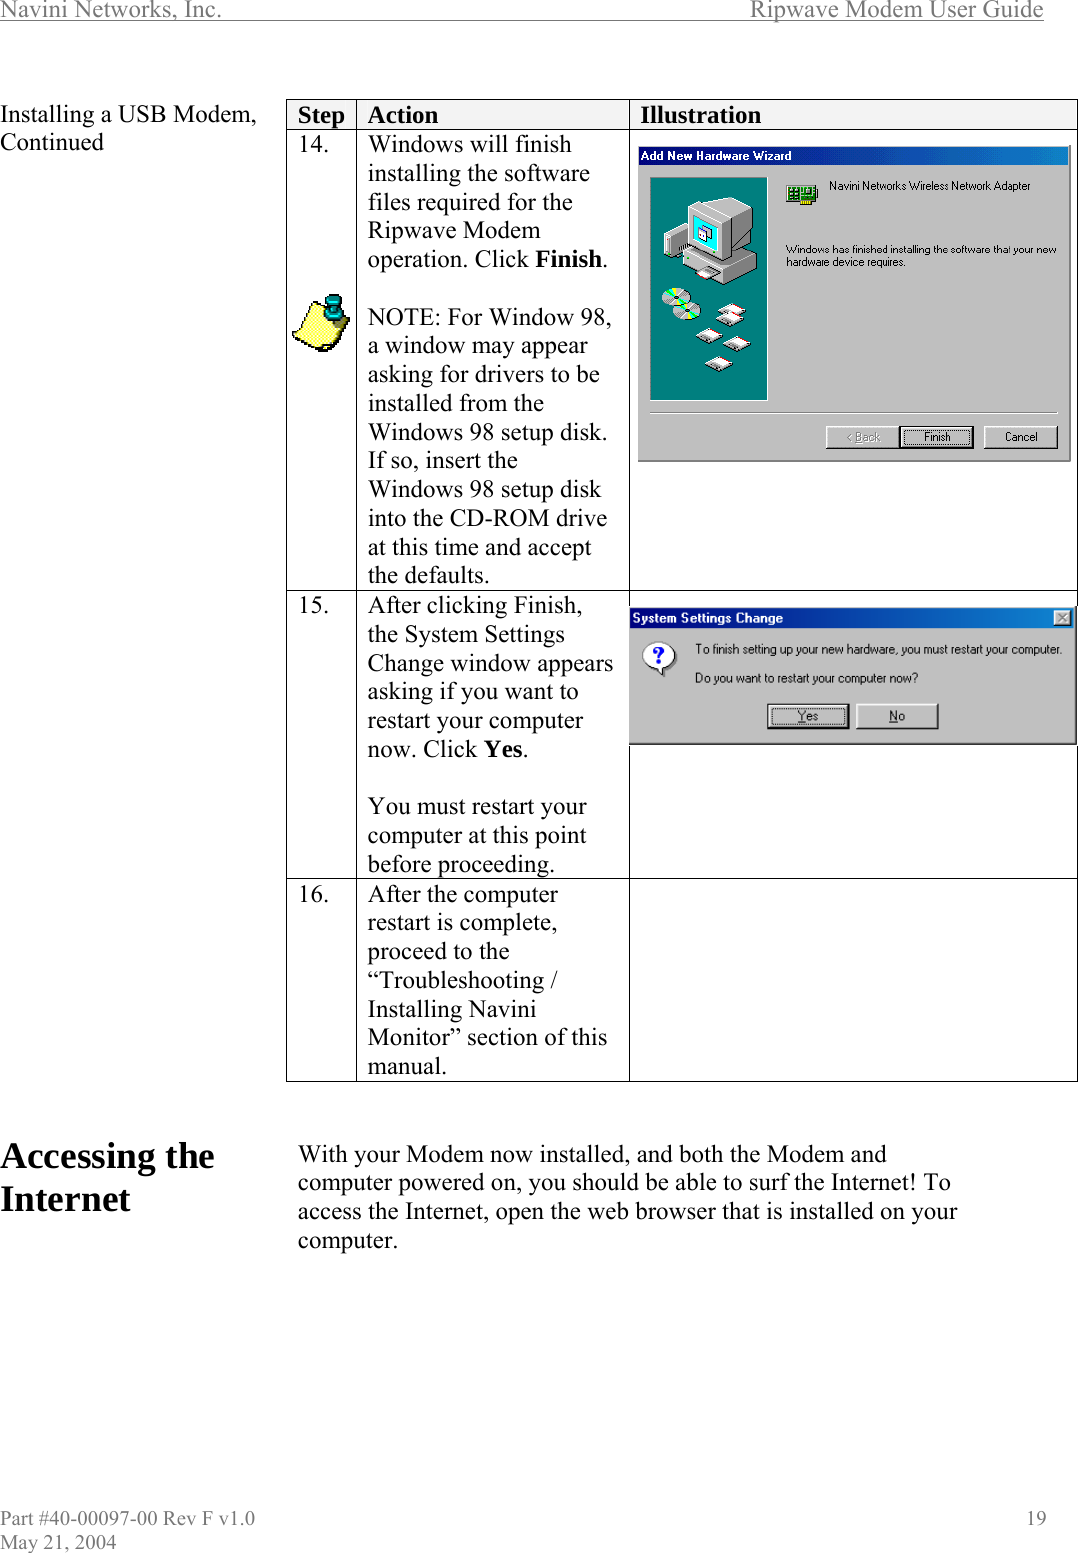 Navini Networks, Inc.        Ripwave Modem User Guide Installing a USB Modem, Continued                                   Accessing the Internet        Step  Action  Illustration 14.  Windows will finish installing the software files required for the Ripwave Modem operation. Click Finish.  NOTE: For Window 98, a window may appear asking for drivers to be installed from the Windows 98 setup disk. If so, insert the Windows 98 setup disk into the CD-ROM drive at this time and accept the defaults.  15.  After clicking Finish, the System Settings Change window appears asking if you want to restart your computer now. Click Yes.  You must restart your computer at this point before proceeding.  16.  After the computer restart is complete, proceed to the “Troubleshooting / Installing Navini Monitor” section of this manual.     With your Modem now installed, and both the Modem and computer powered on, you should be able to surf the Internet! To access the Internet, open the web browser that is installed on your computer.       Part #40-00097-00 Rev F v1.0                                          19 May 21, 2004 